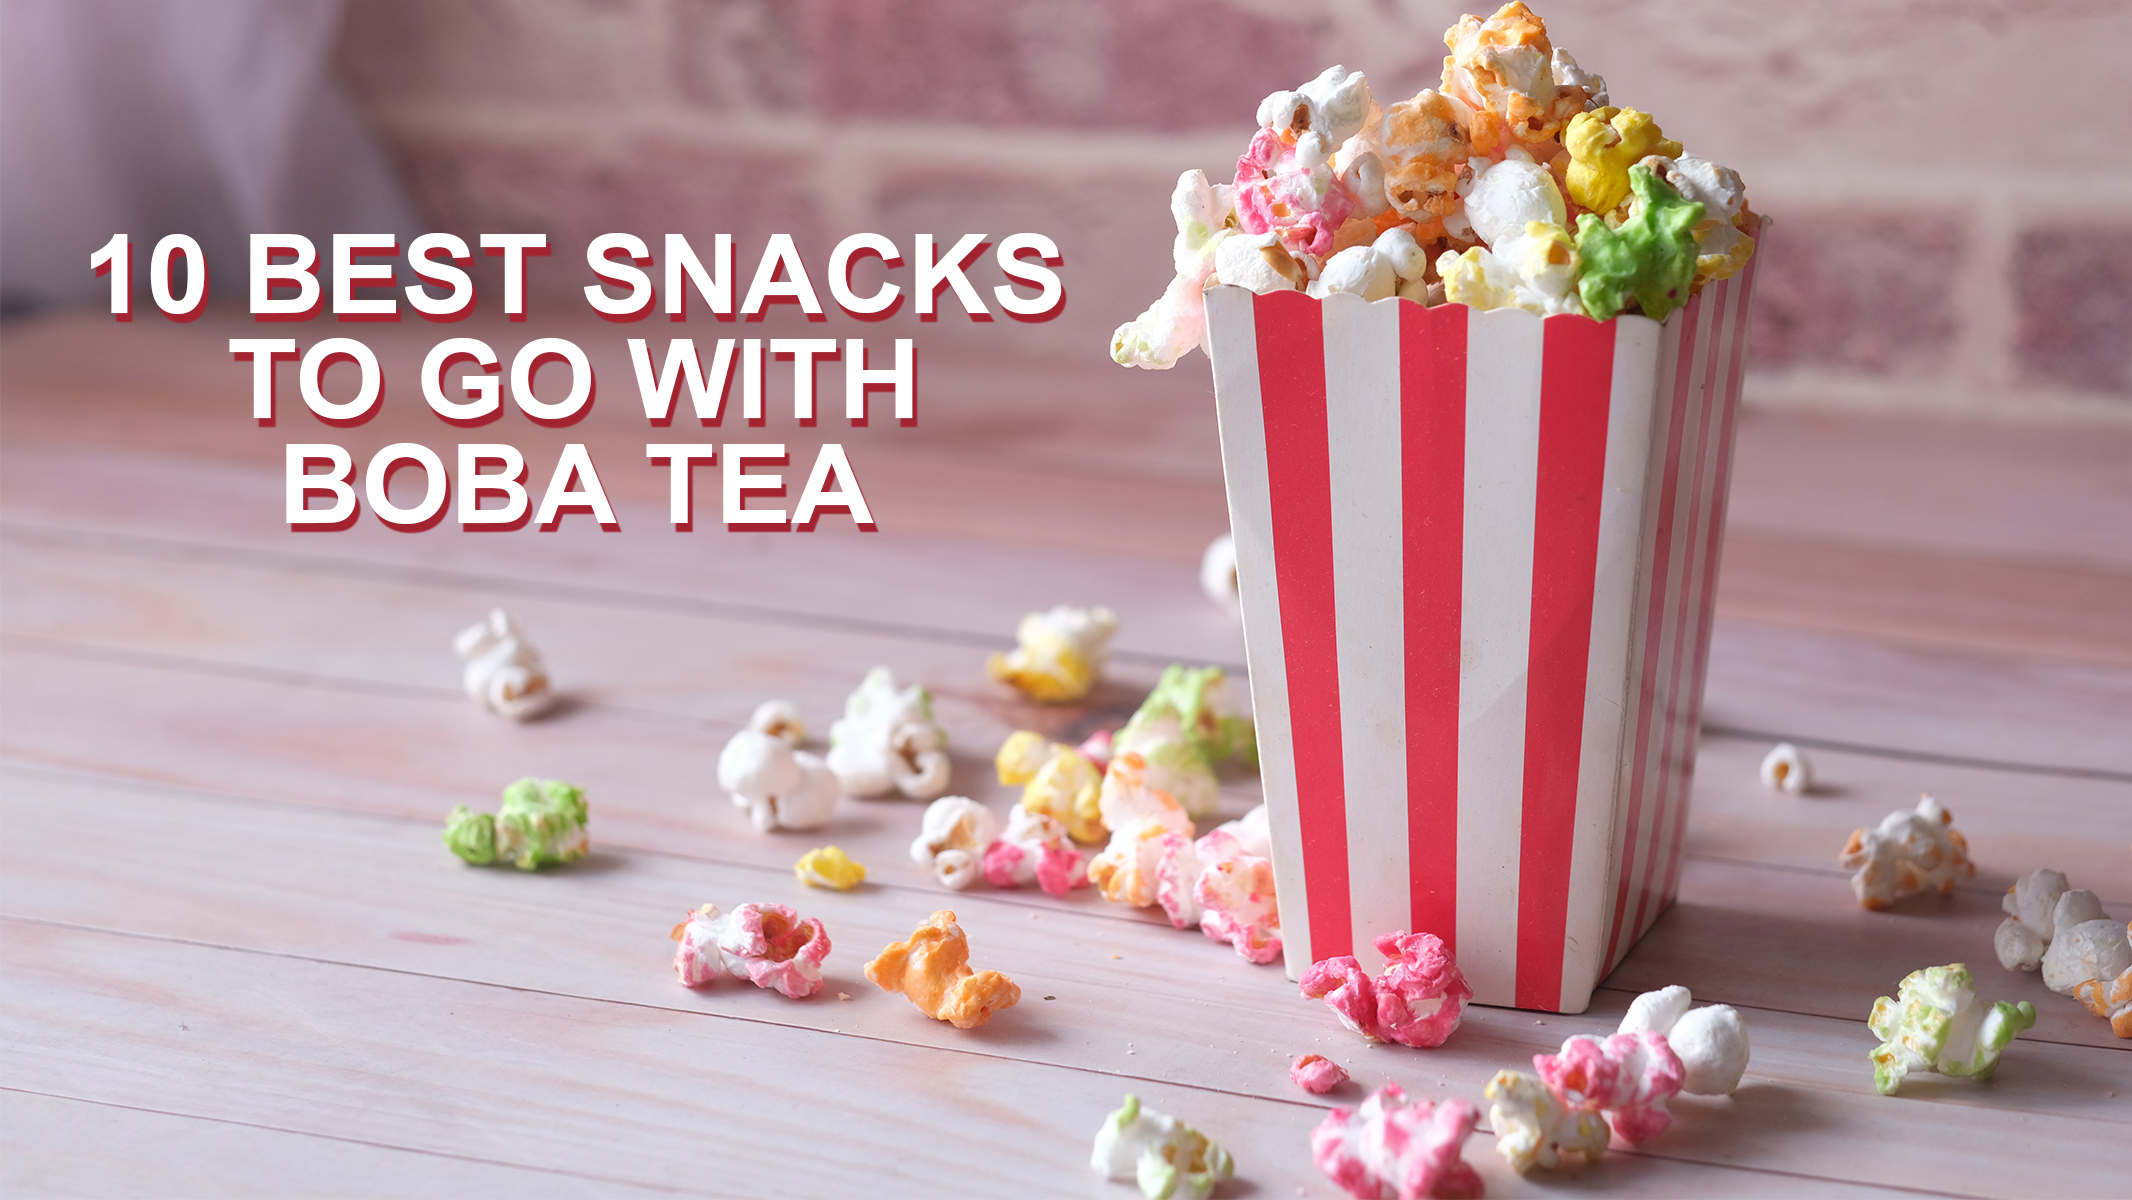 10 Best Snacks to Go with Boba Tea